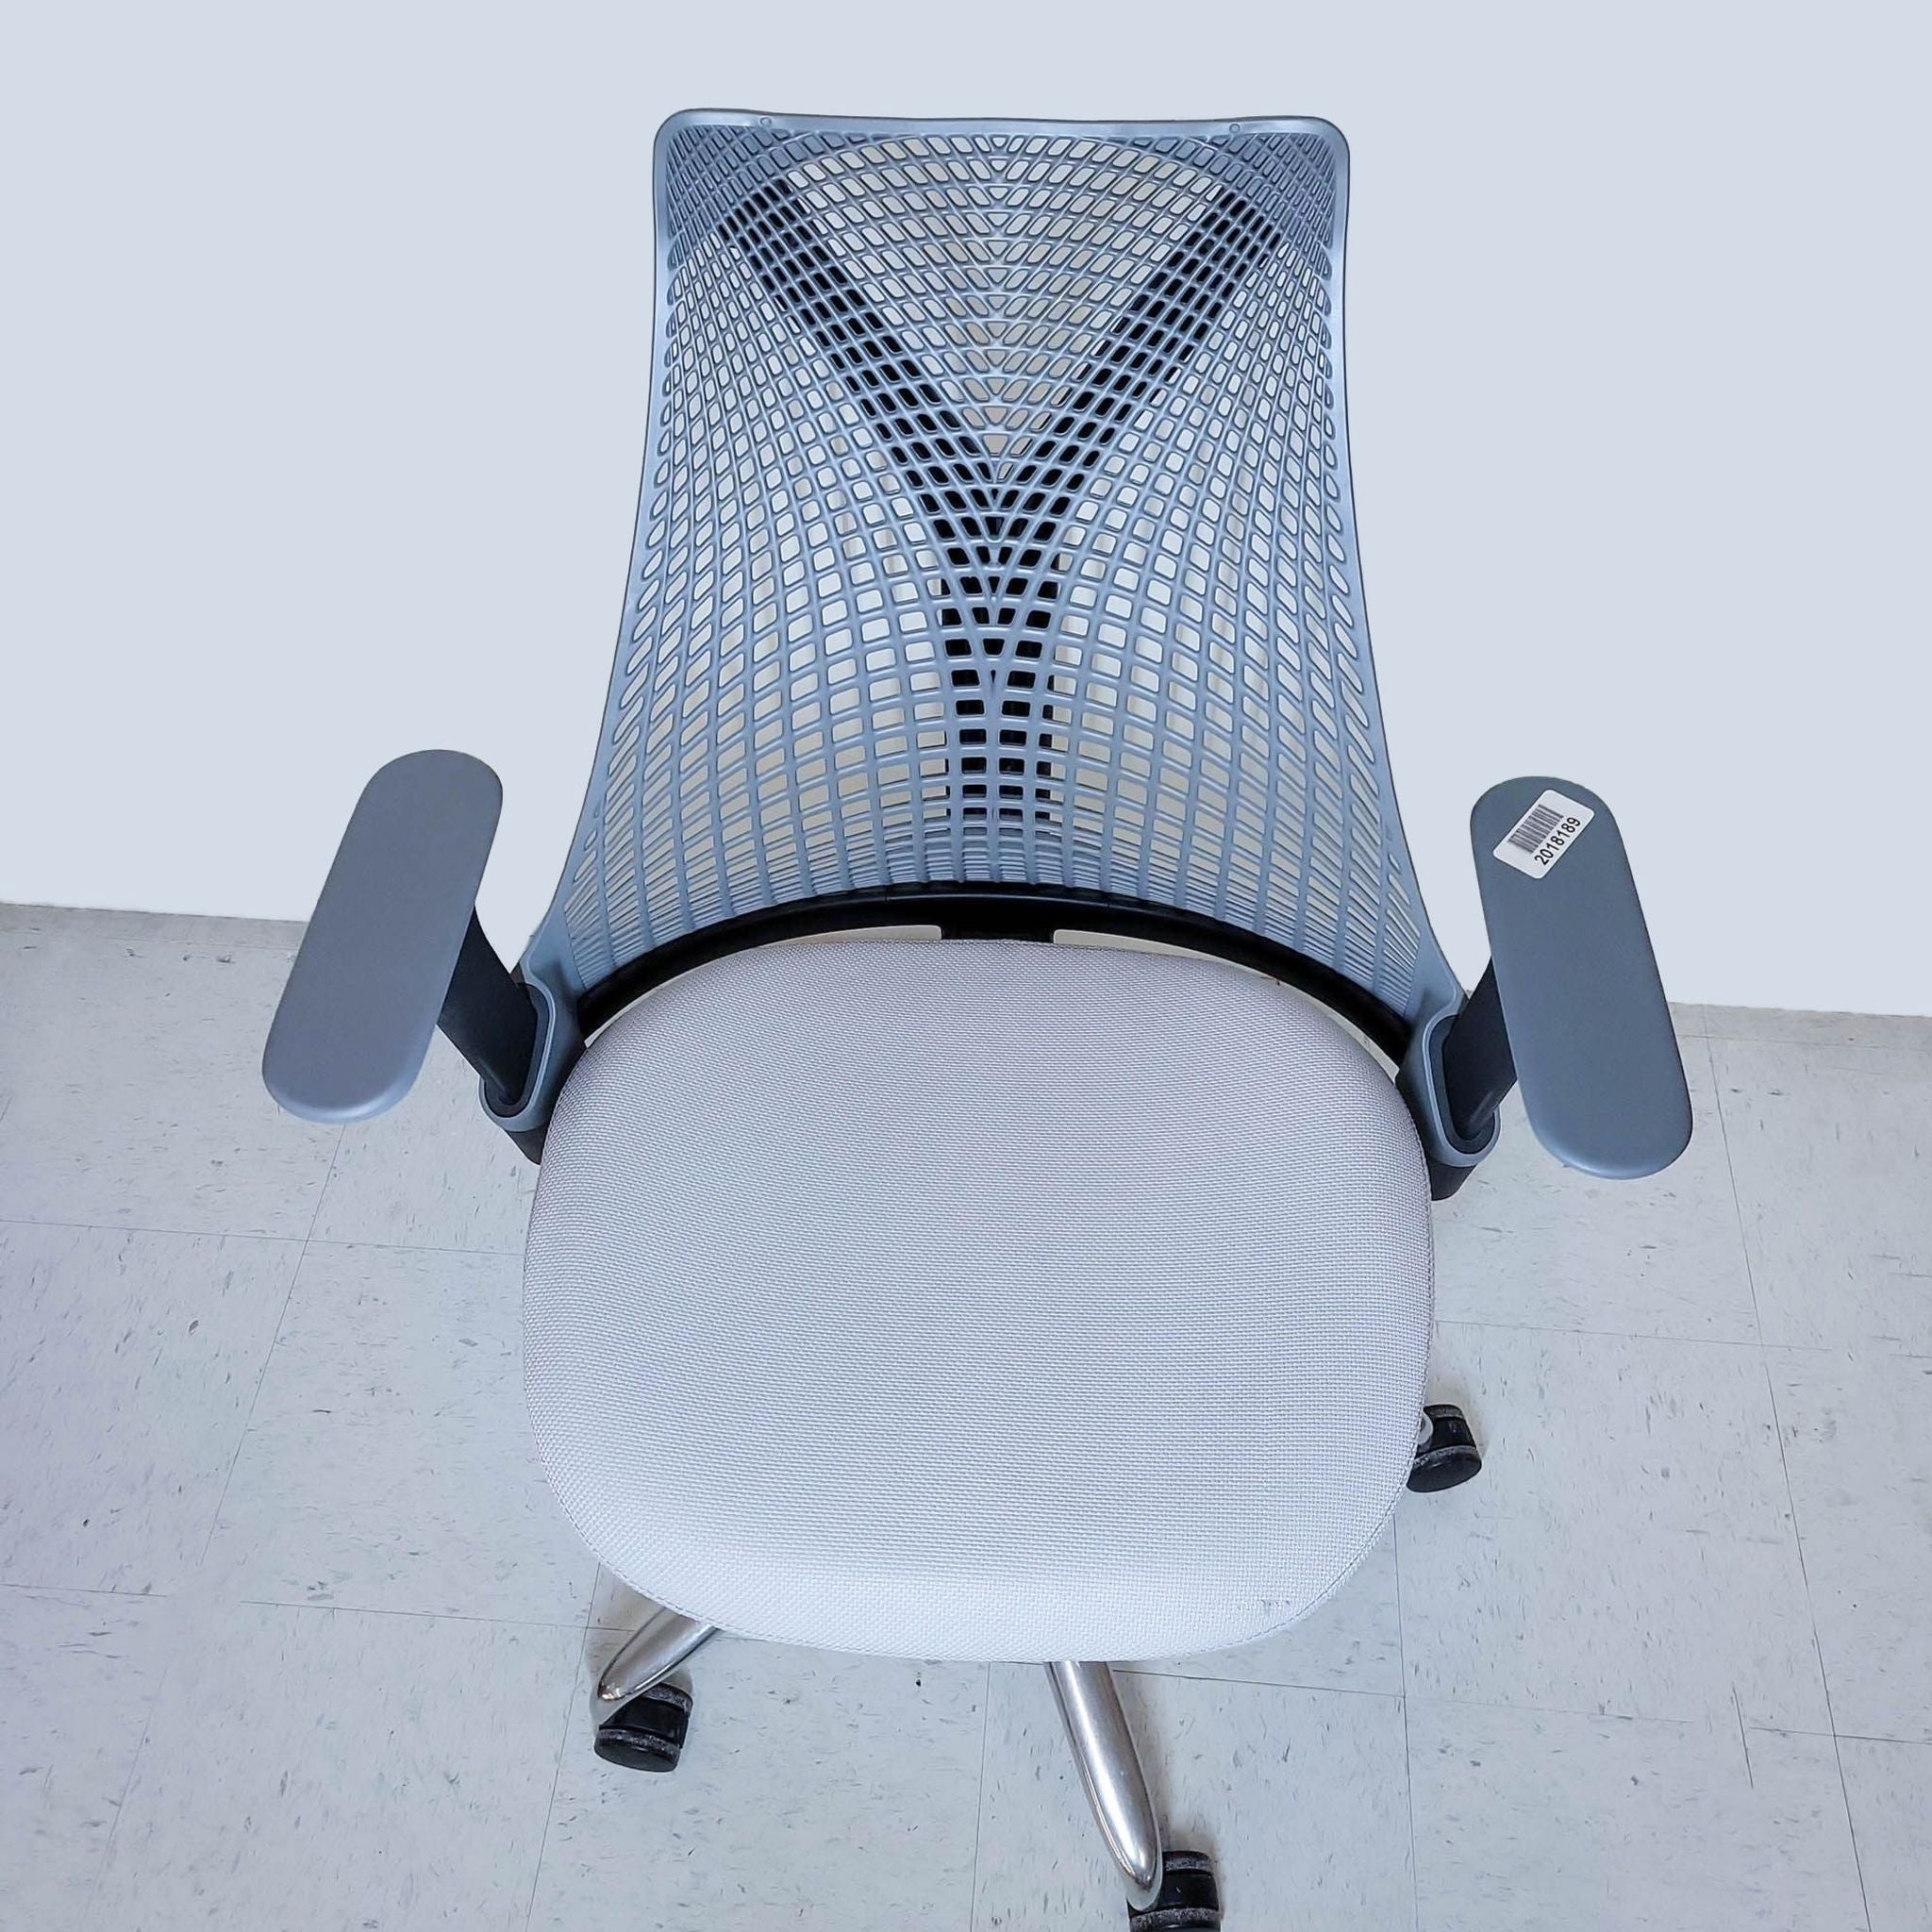 Herman Miller ergonomic office chair with mesh design, black and white, viewed from above, against a plain backdrop.